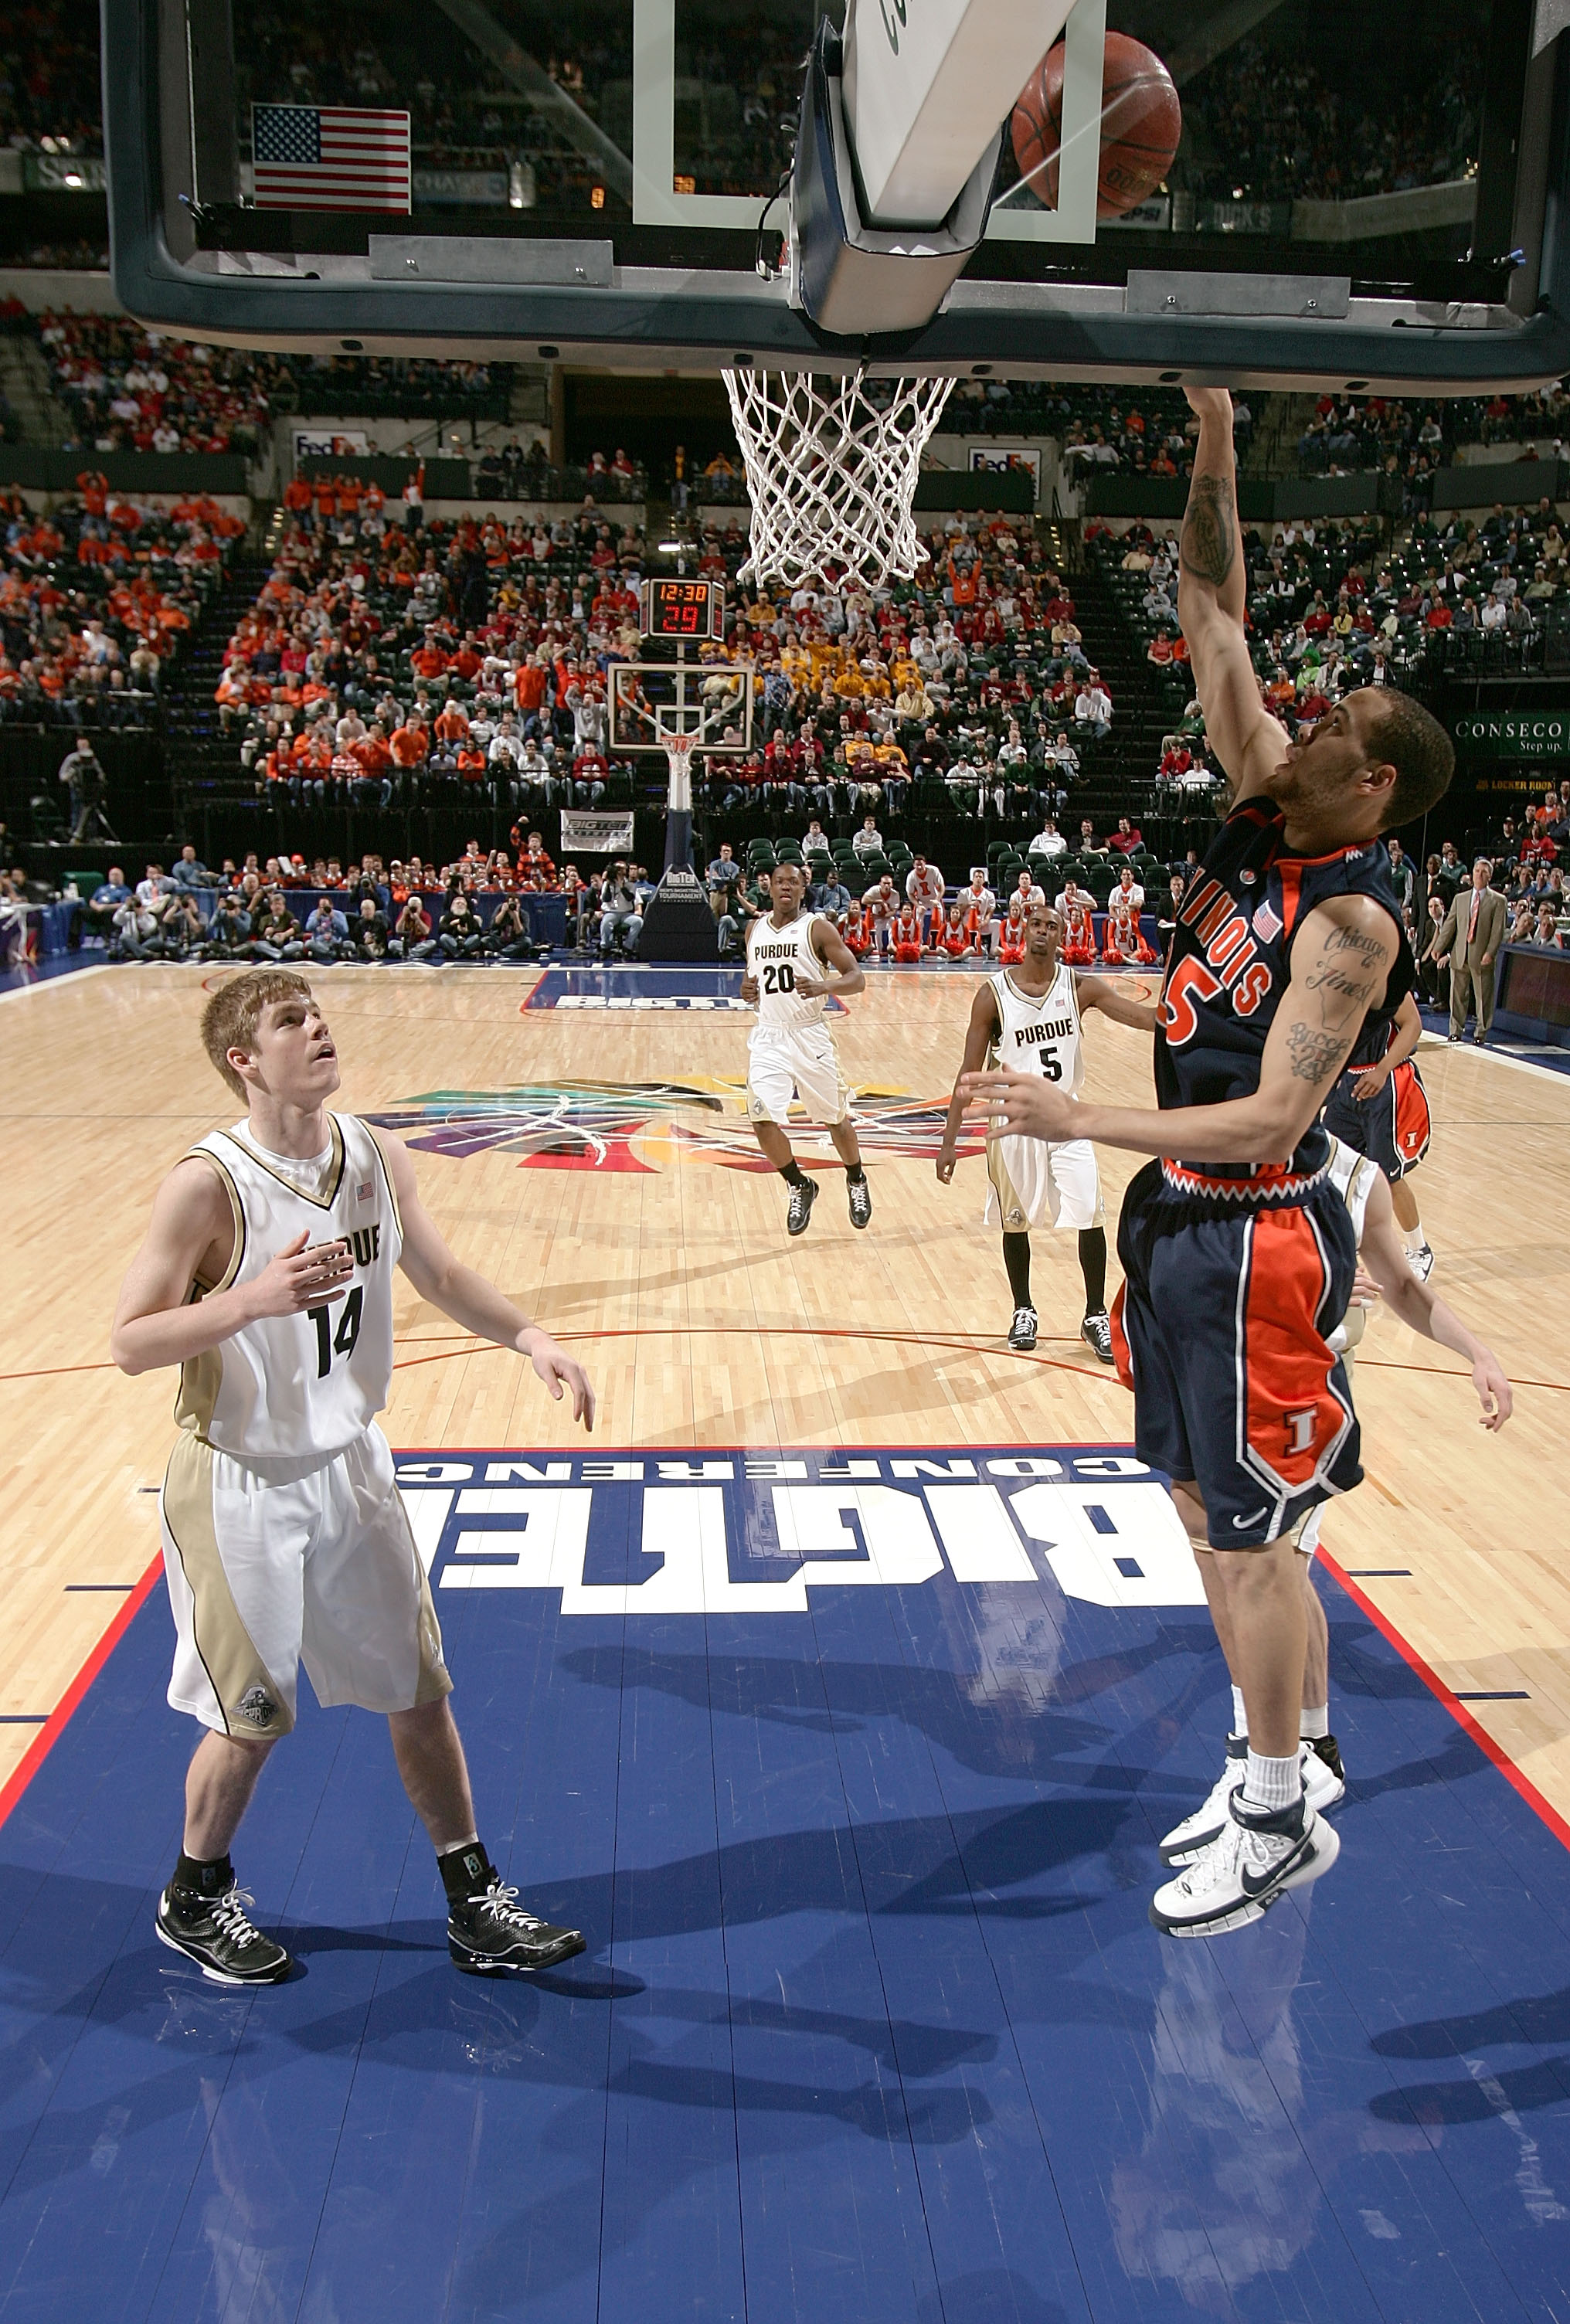 INDIANAPOLIS - MARCH 14:  Calvin Brock #25 of the Illinois Fighting Illini attempts a shot against Scott Martin #14 of the Purdue Boilermakers during the Big Ten Men's Basketball Tournament at Conseco Fieldhouse on March 14, 2008 in Indianapolis, Indiana.